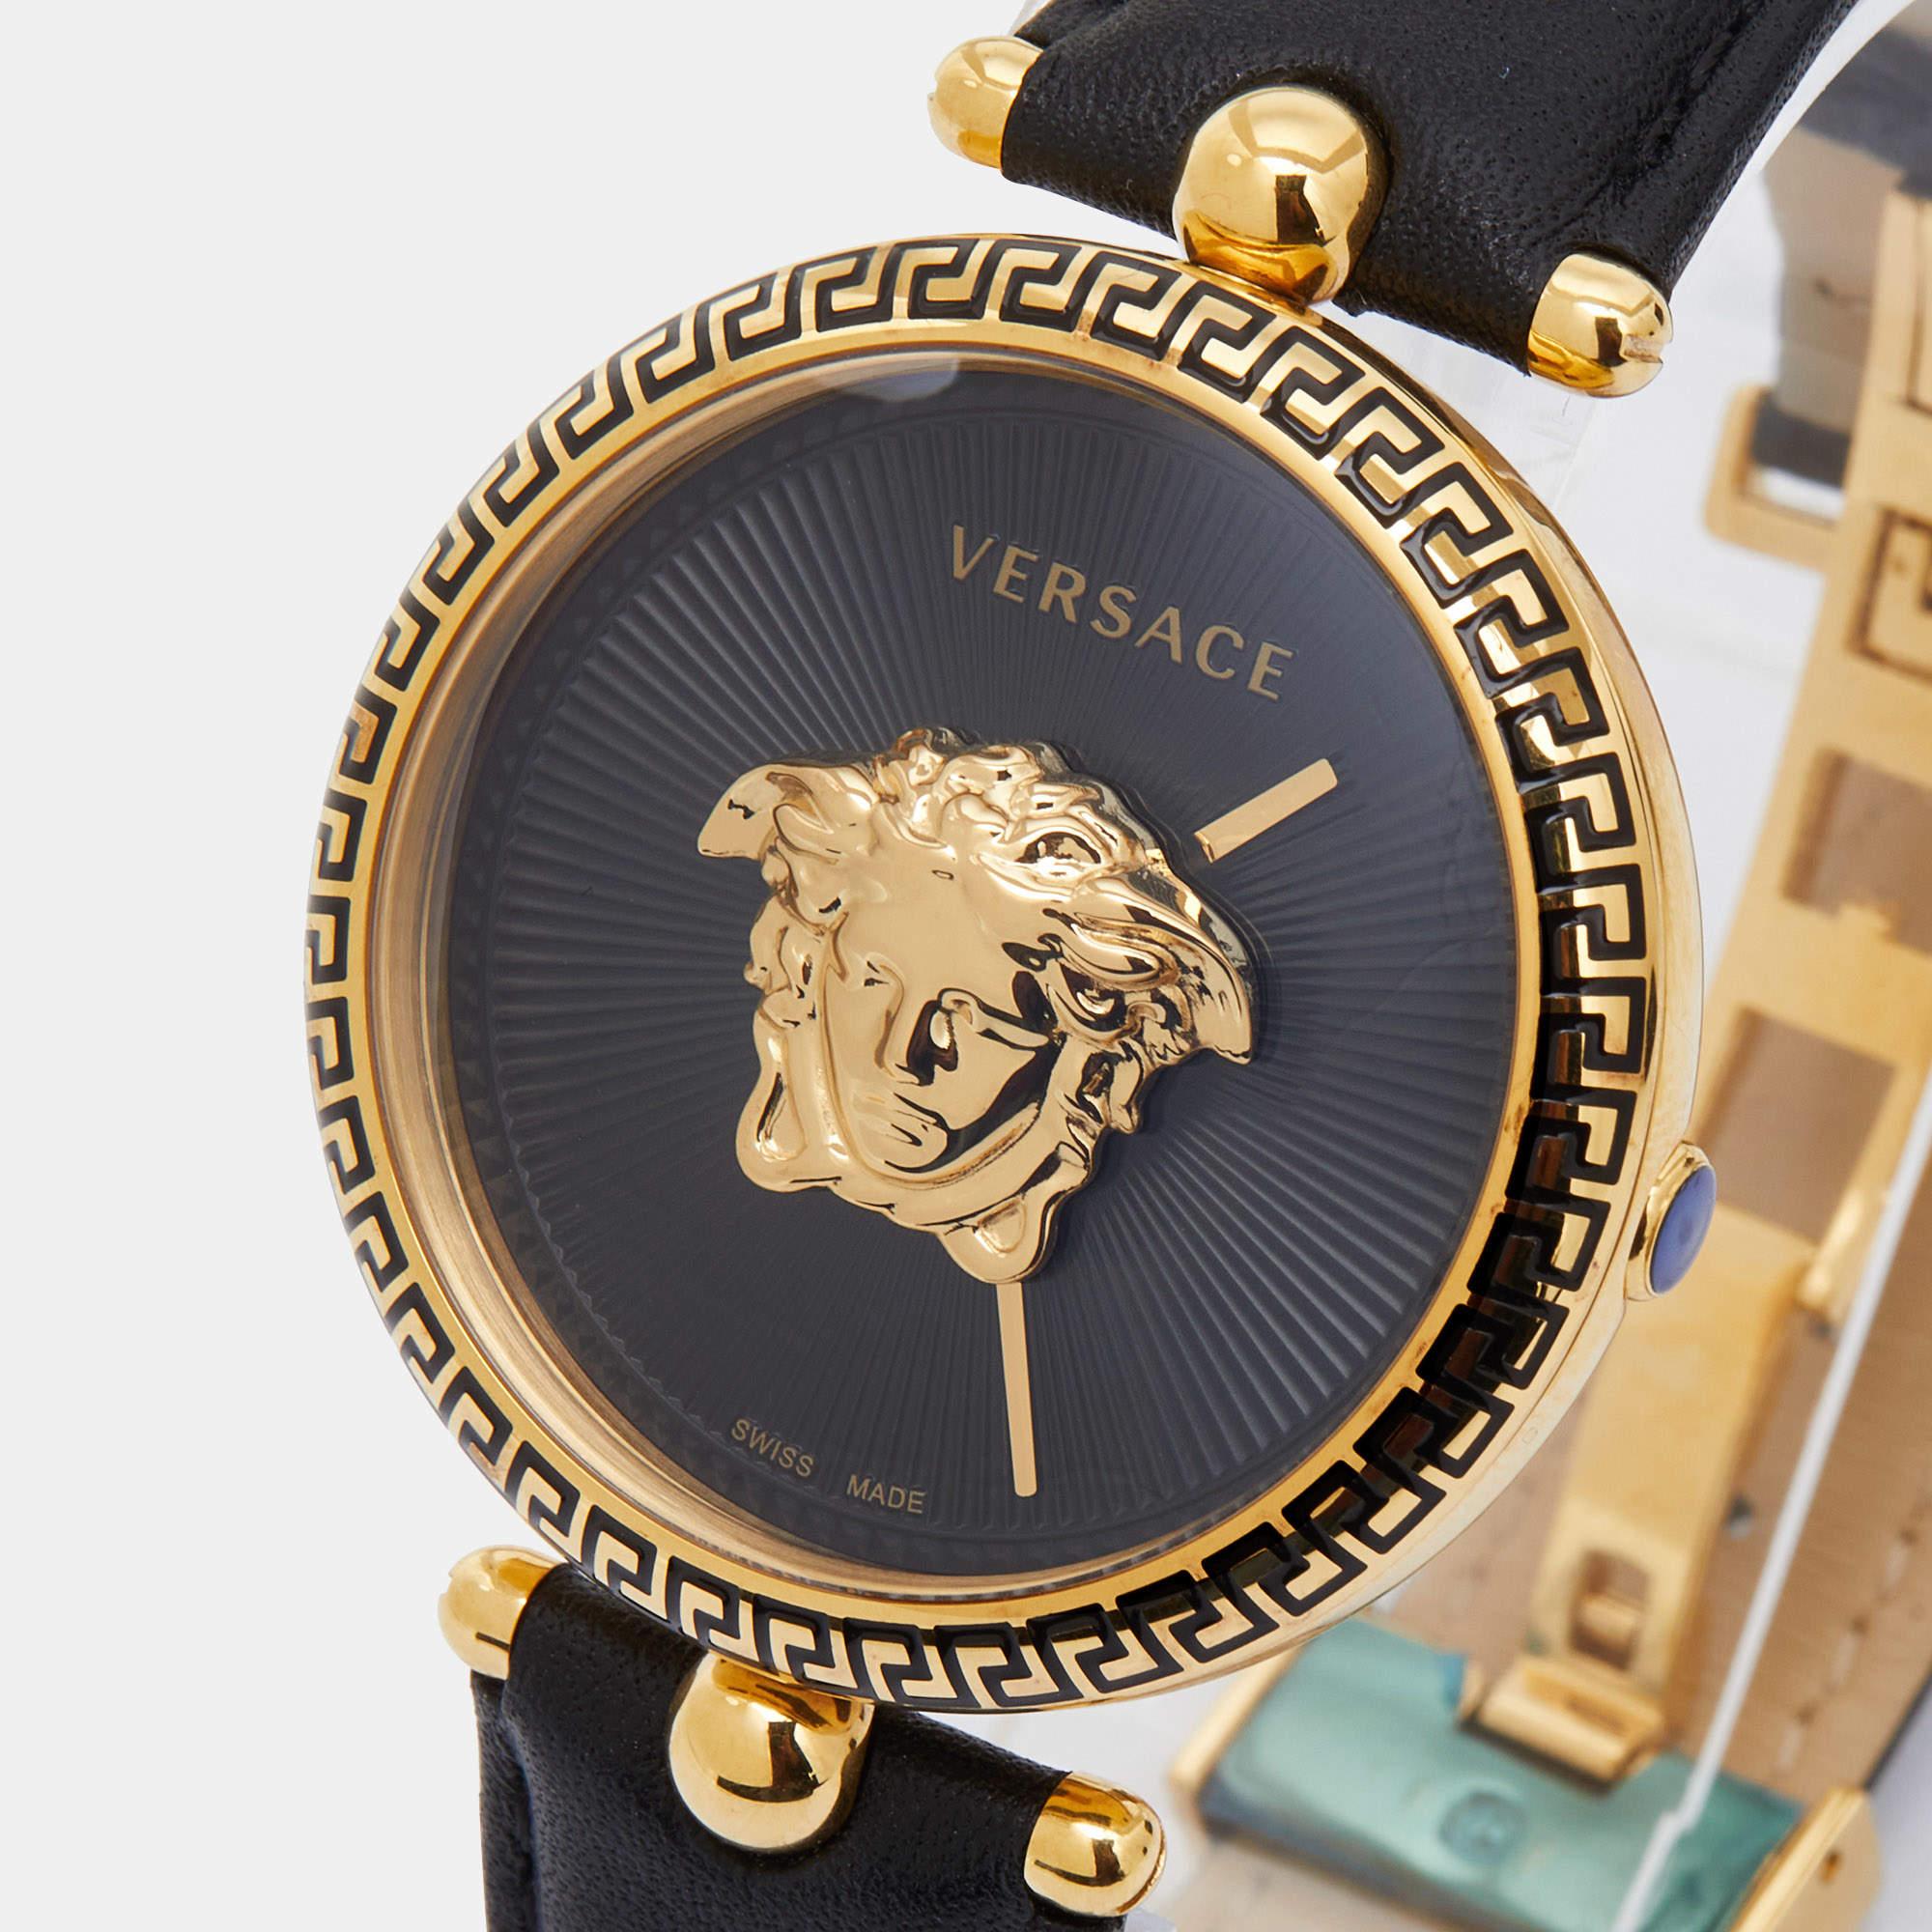 A timeless silhouette made of high-quality materials and packed with precision and luxury makes this Versace wristwatch the perfect choice for a sophisticated finish to any look. It is a grand creation to elevate the everyday